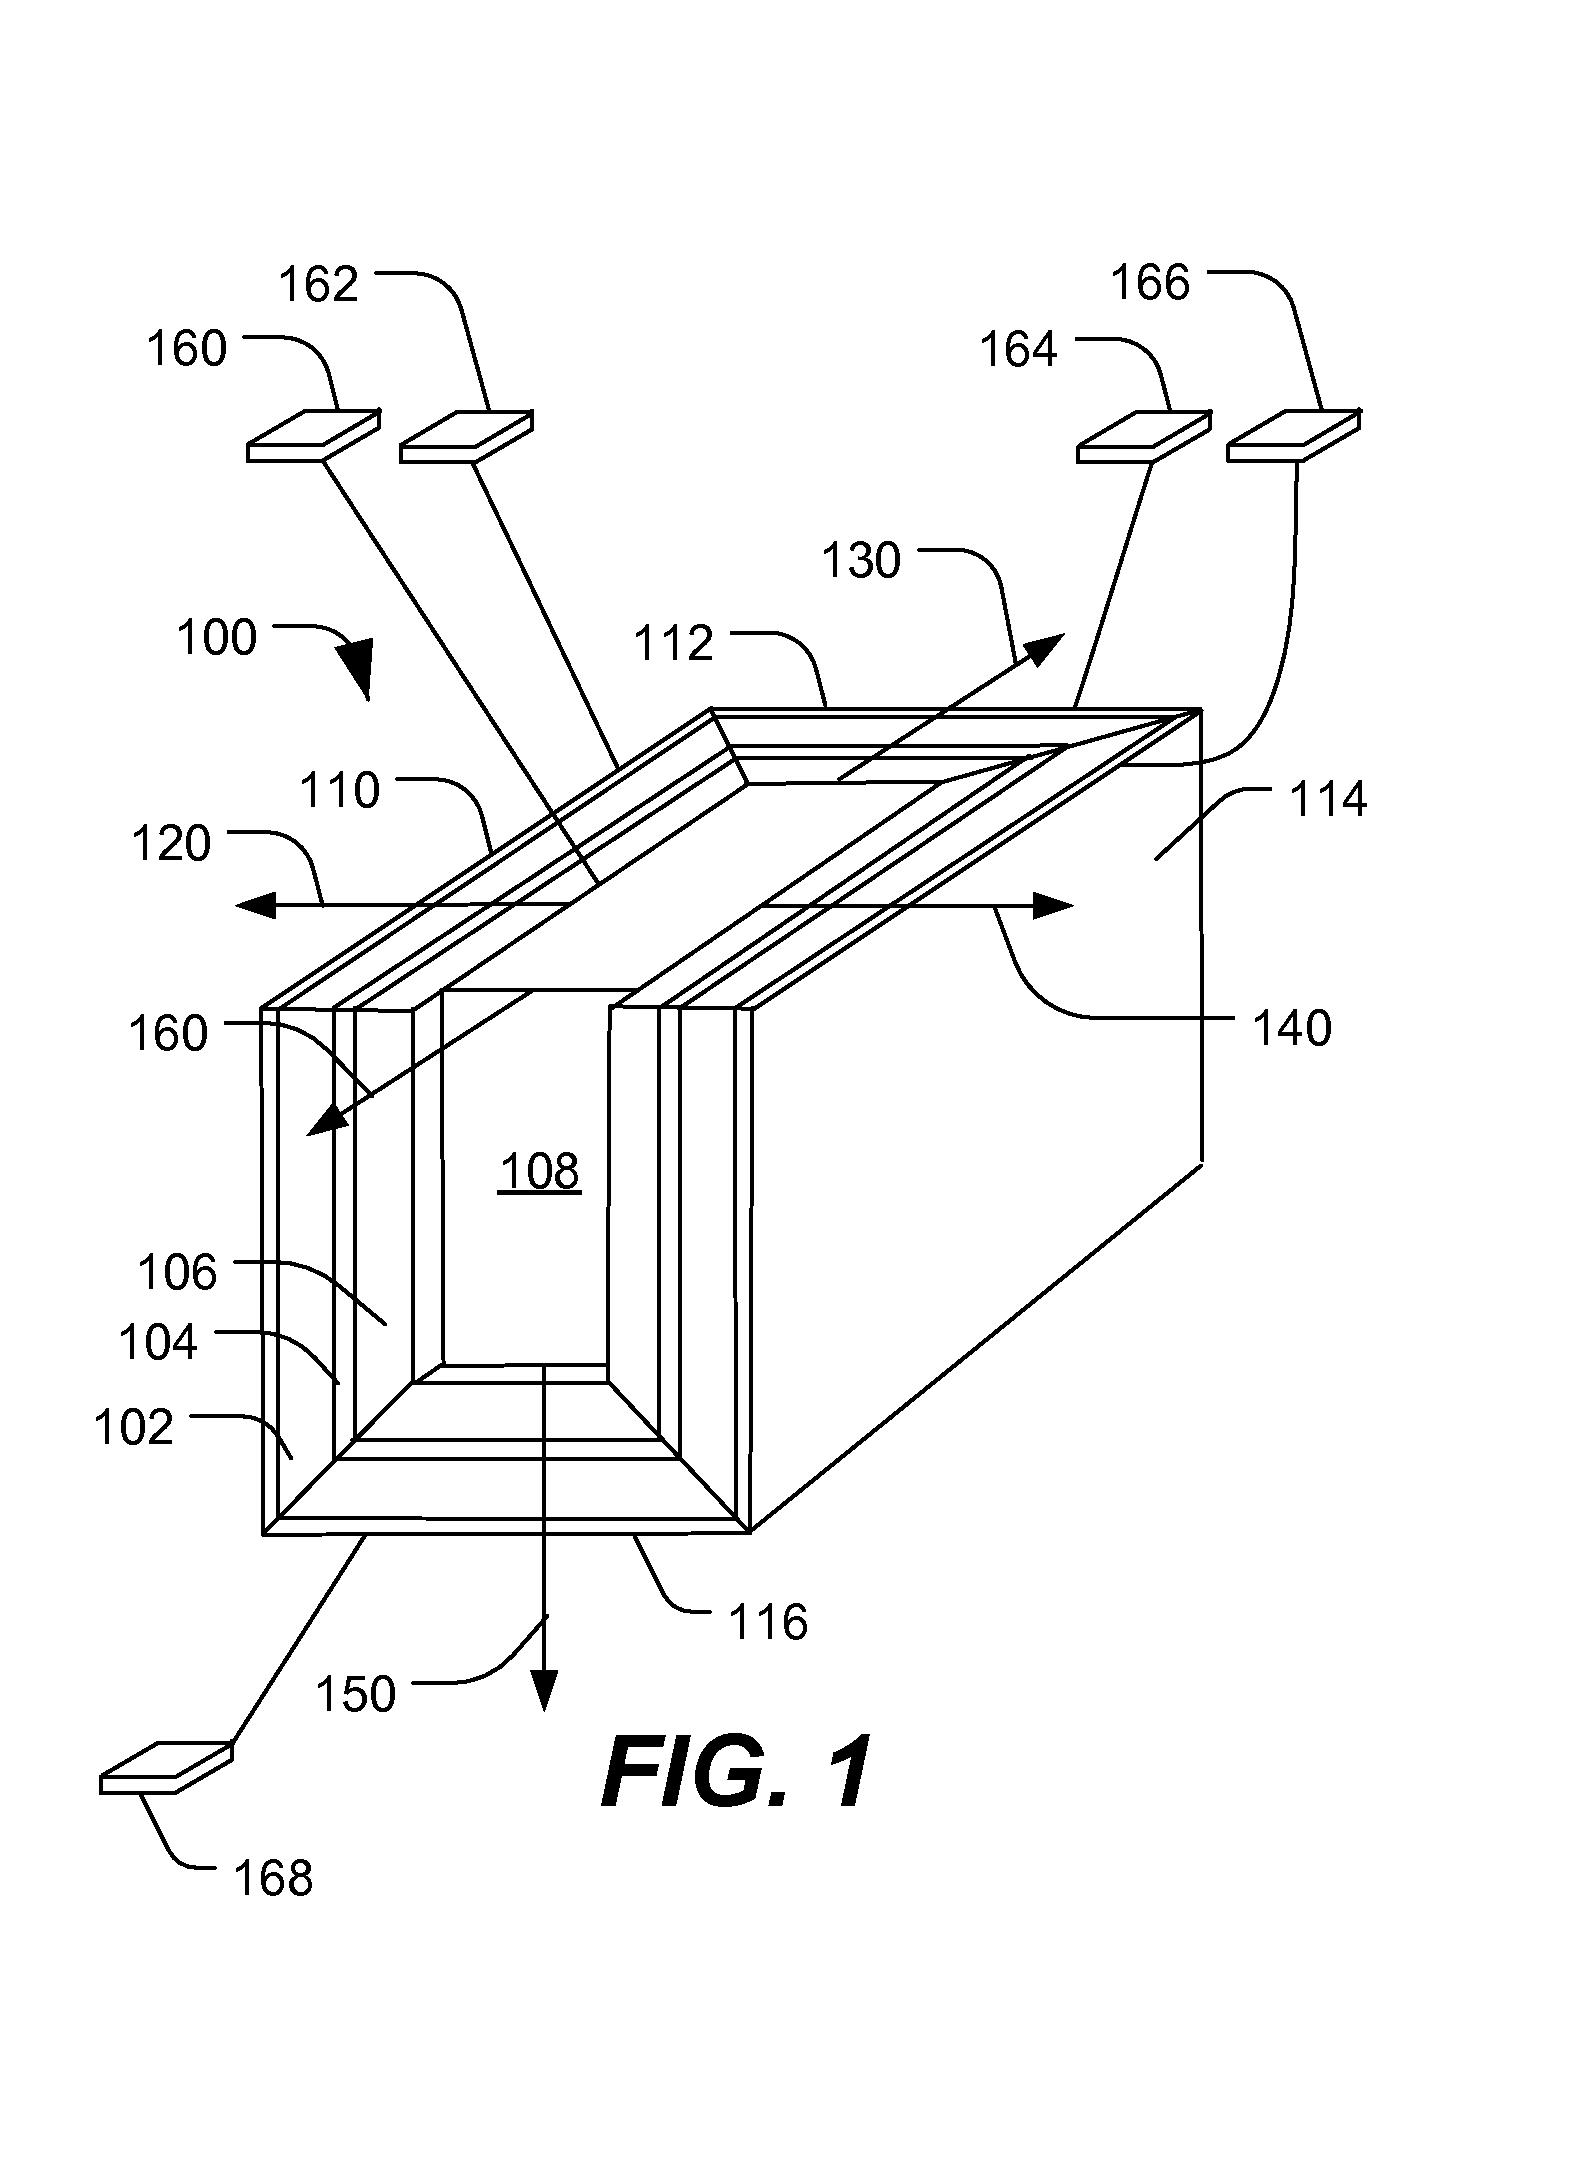 Magnetic tunnel junction cell including multiple vertical magnetic domains